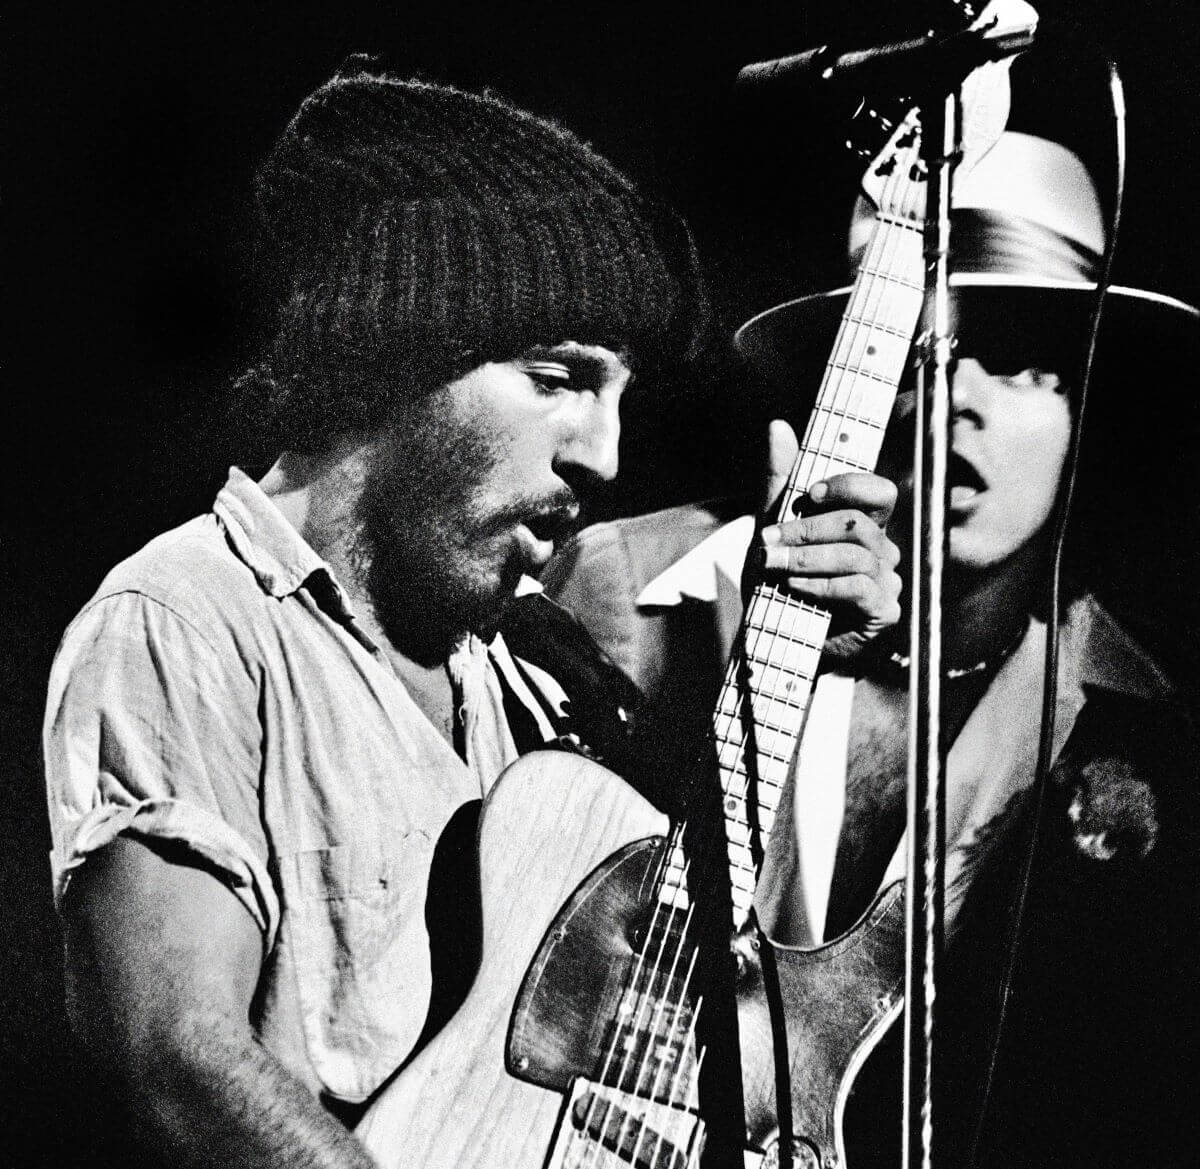 A black and white picture of Bruce Springsteen wearing a knit hat and playing guitar.